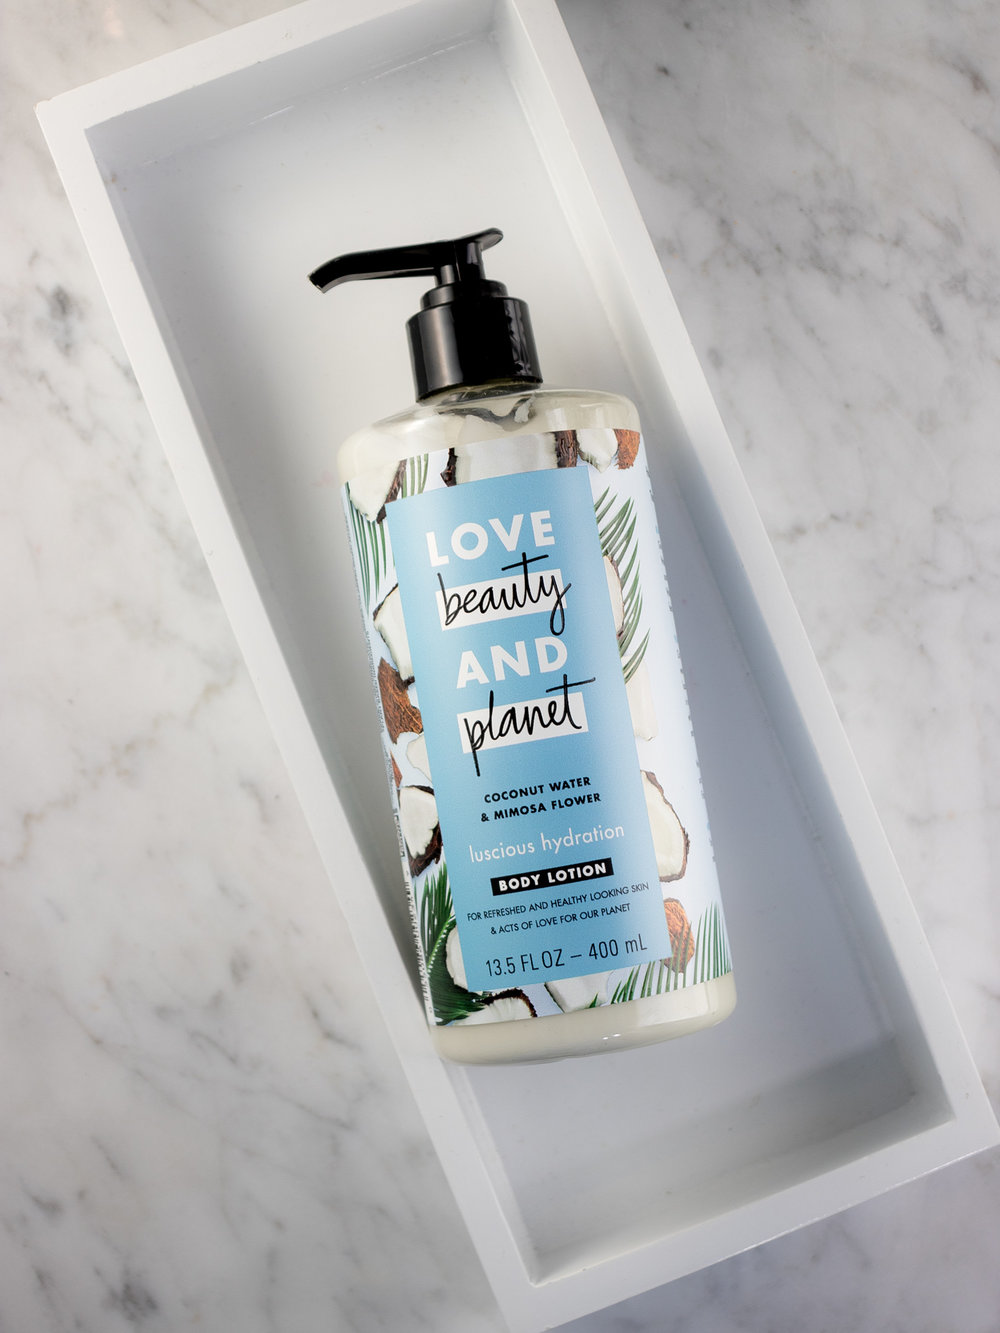 Love Beauty and Planet Coconut Water &amp; Mimosa Flower Body Lotion